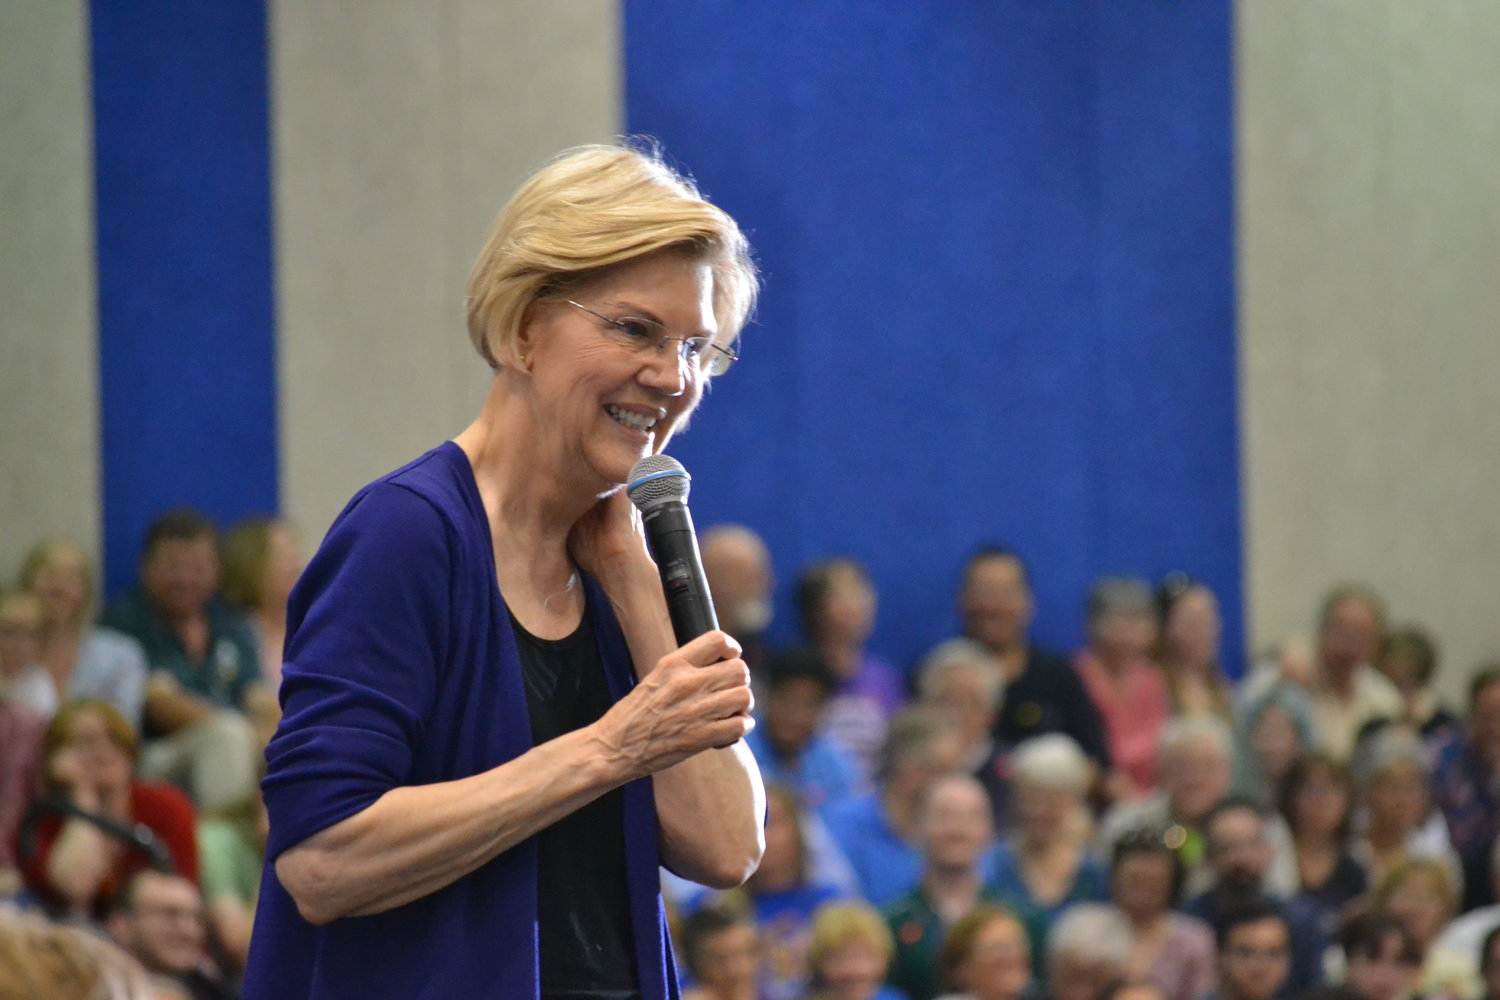 Presidential hopeful Elizabeth Warren delivered an energetic stump speech to more than 1,500 people at Lansing Community College, took three questions and then posed for pictures for over an hour.